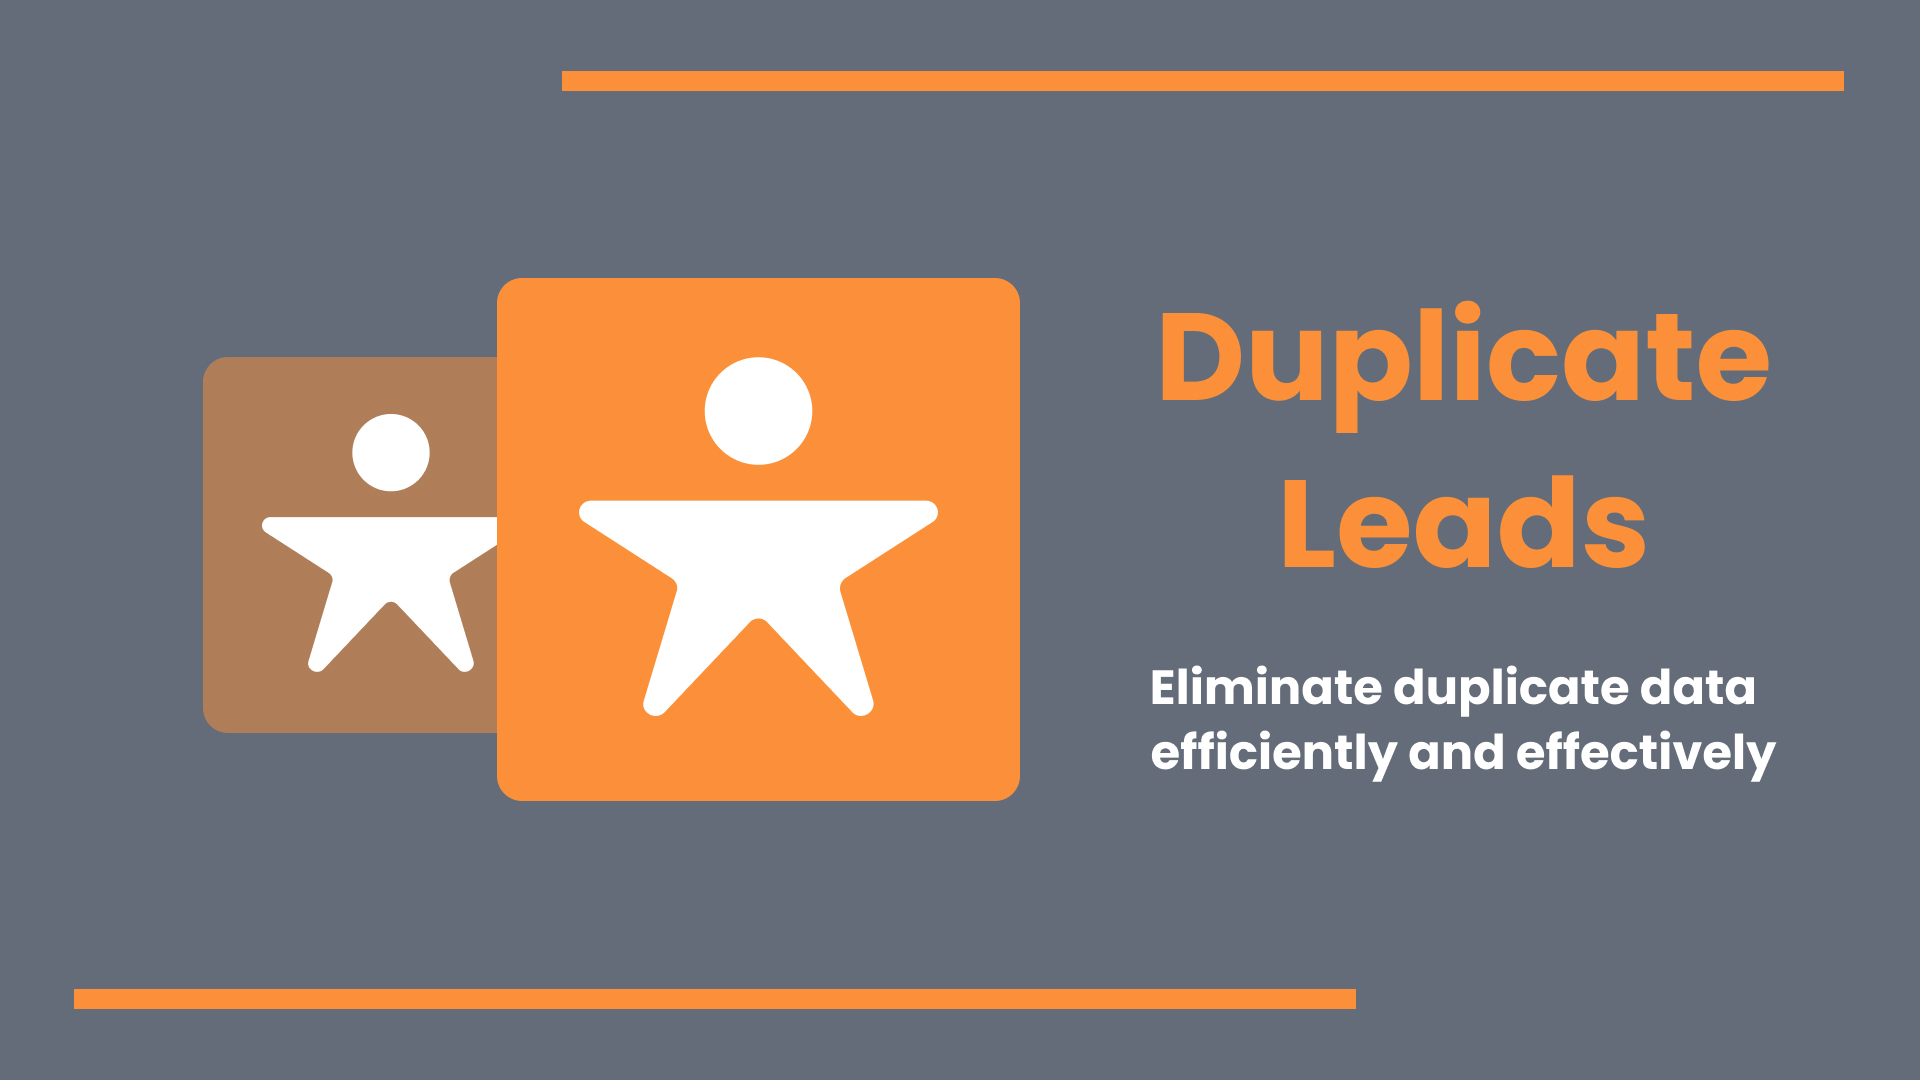 There is a duplicated image that represents the problem that the Delpha Duplicate Lead conversation can detect and resolve for Salesforce Users.